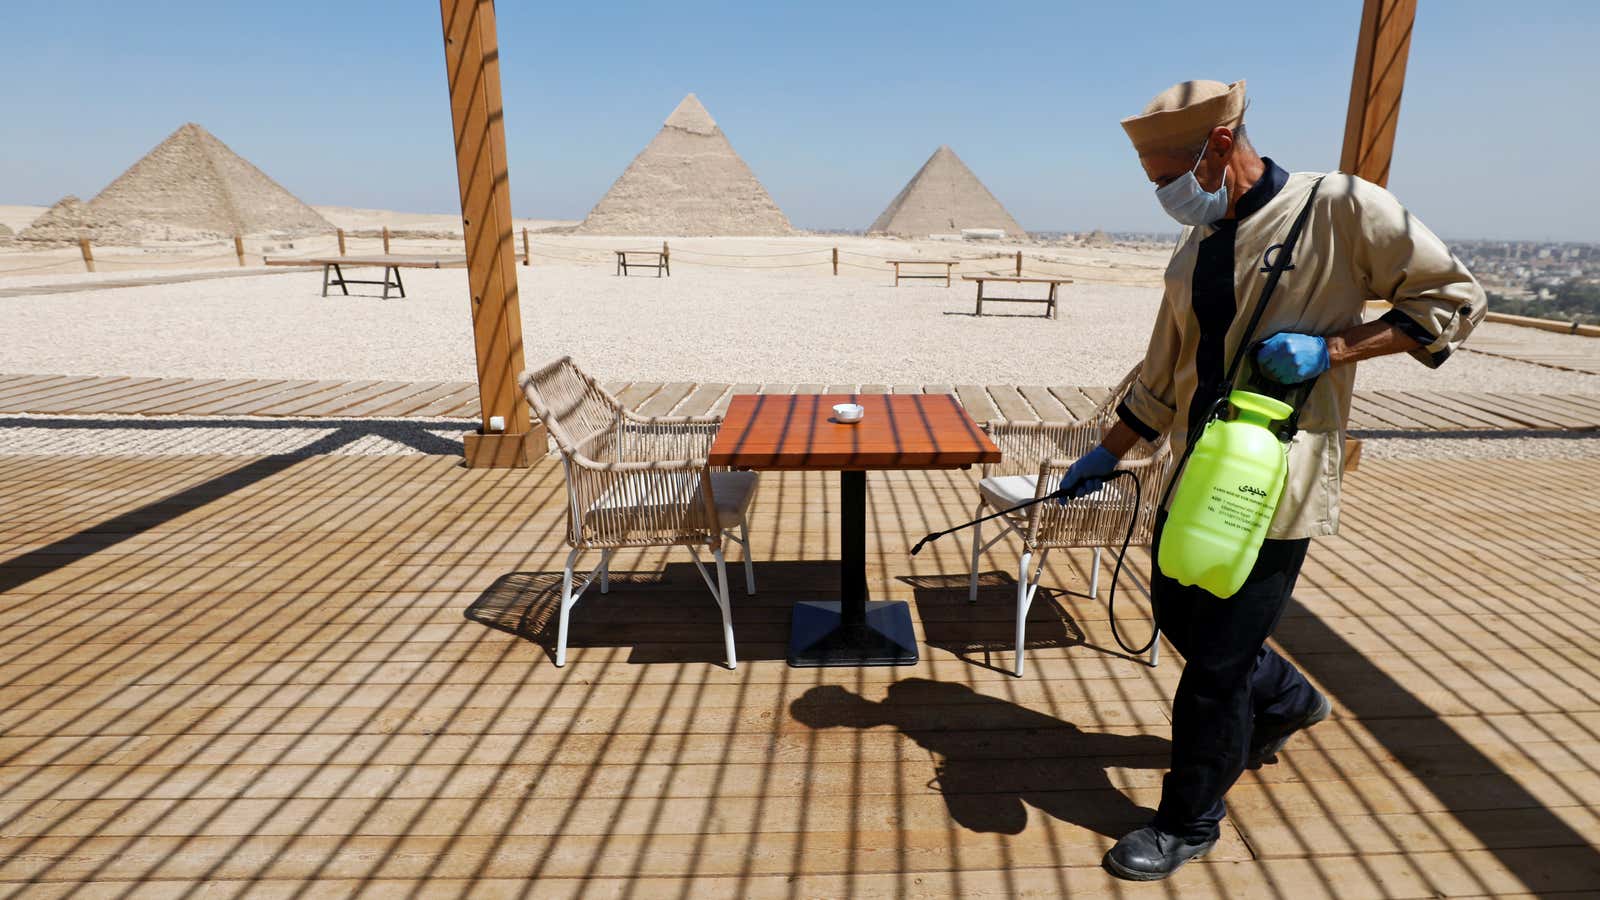 To draw in tourists, Egypt dropped its Covid-19 testing entry requirement for travelers with proof of vaccination.